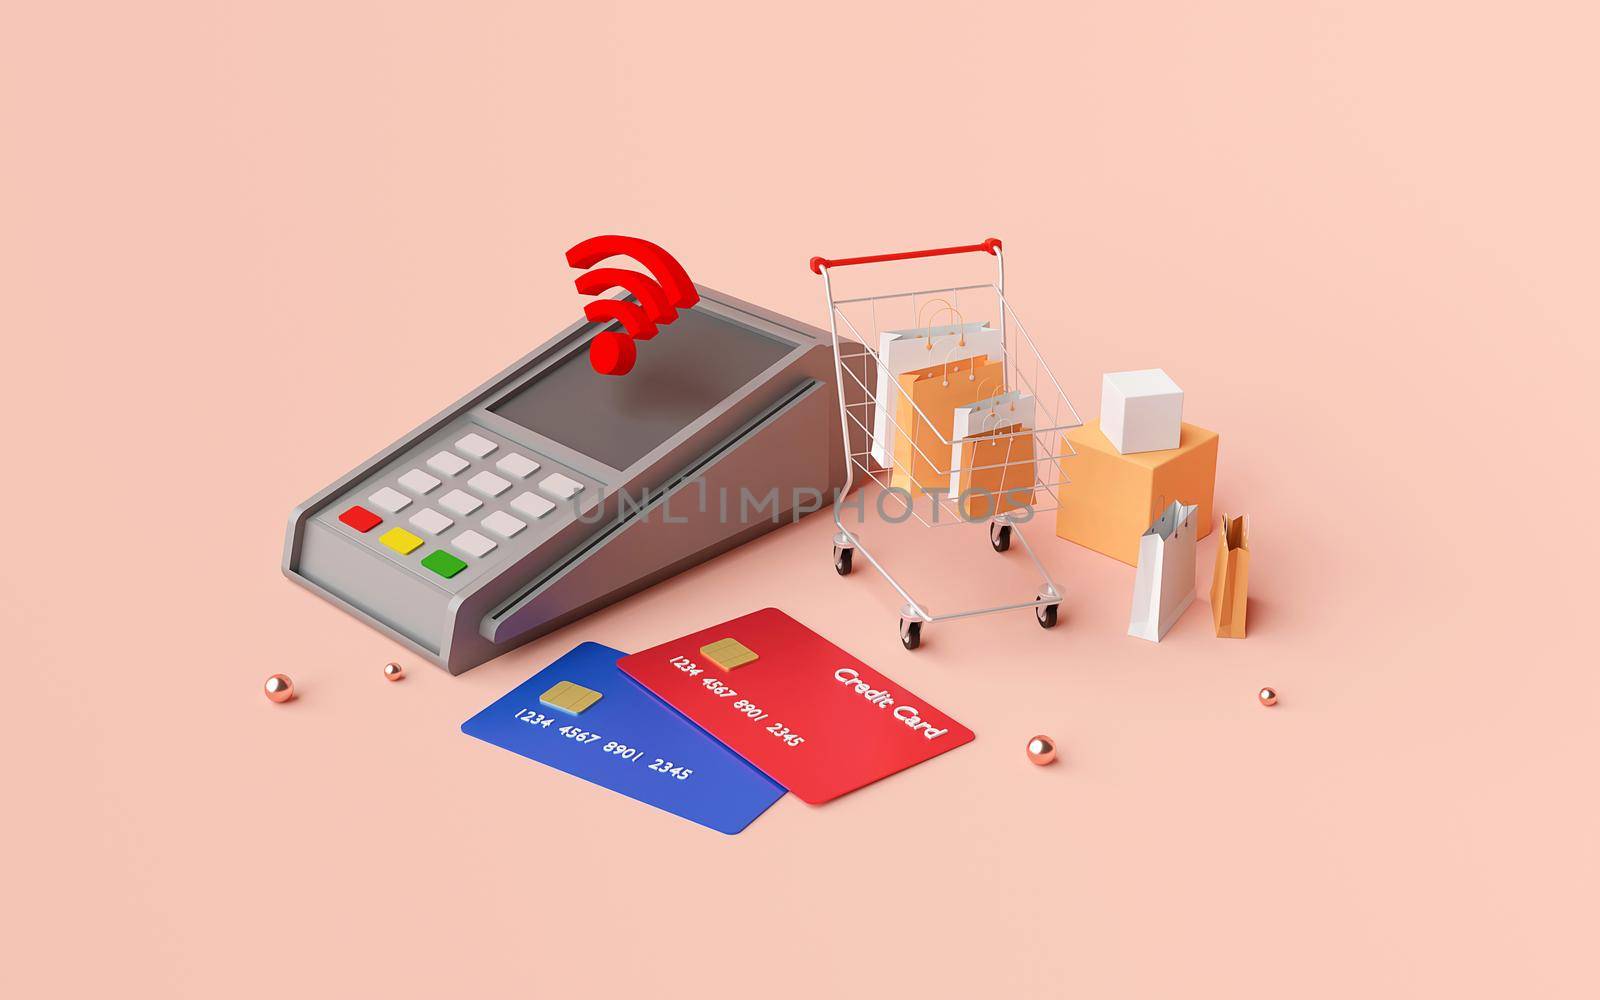 Contactless payment via NFC technology wireless pay by credit card, 3d rendering by nutzchotwarut